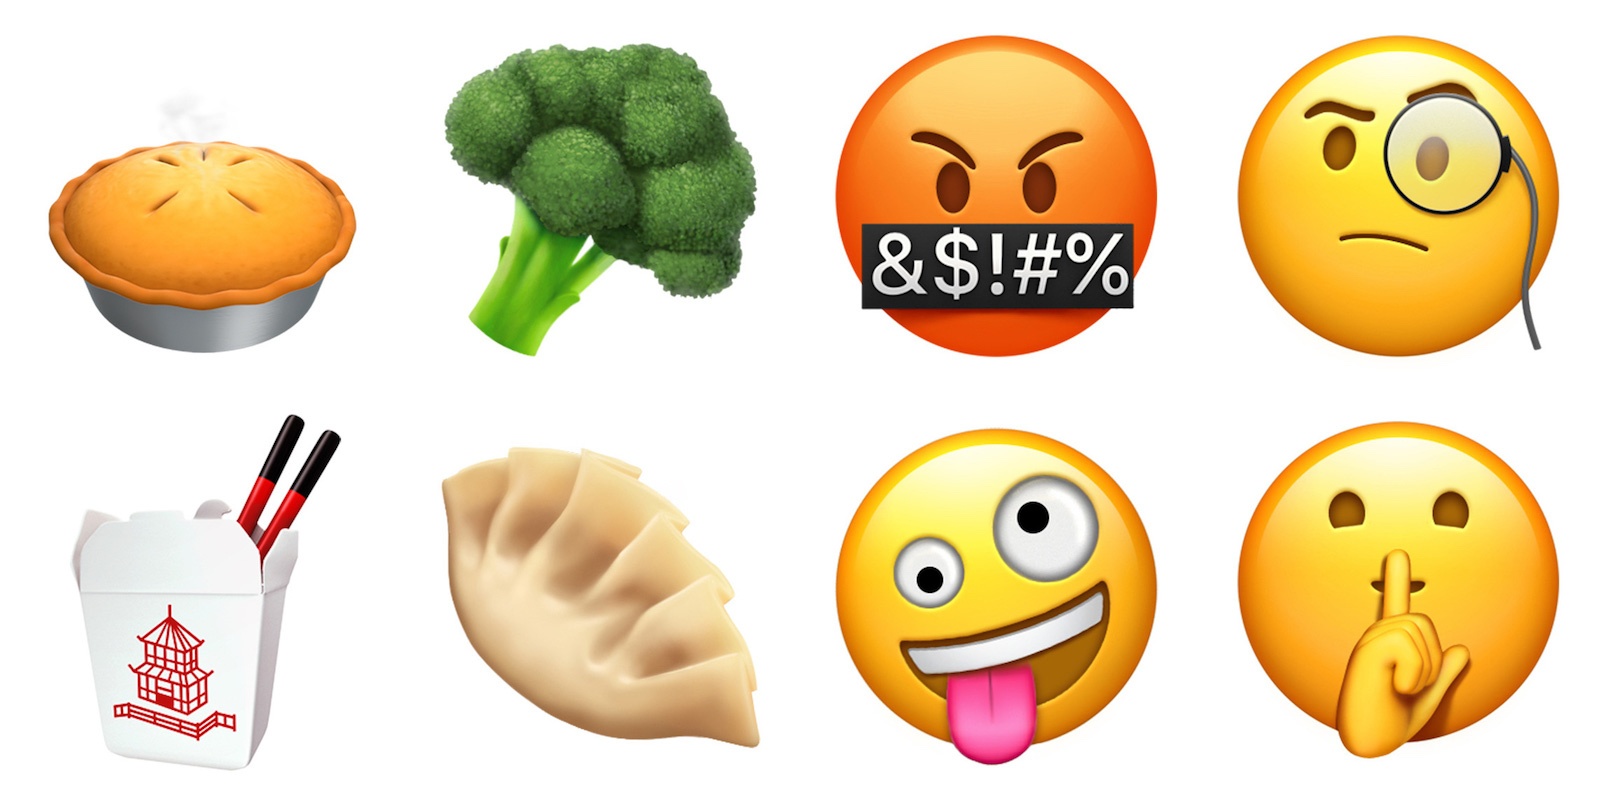 iOS 11.1 brings new emojis and important security updates